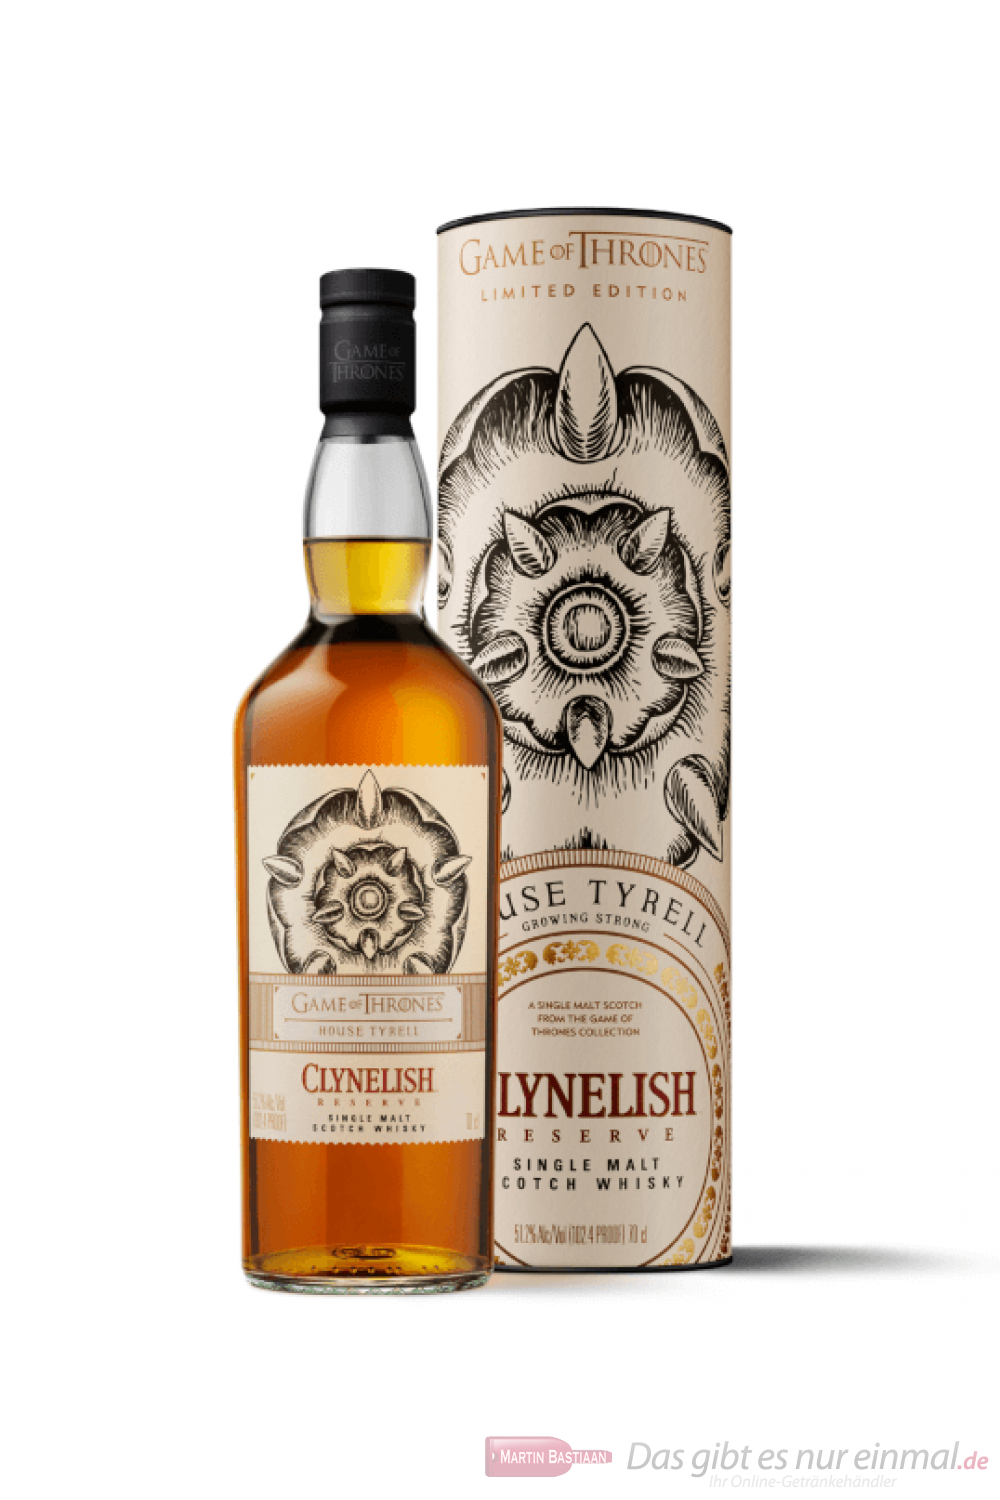 Game of Thrones House Tyrell Clynelish Reserve Whisky 0,7l